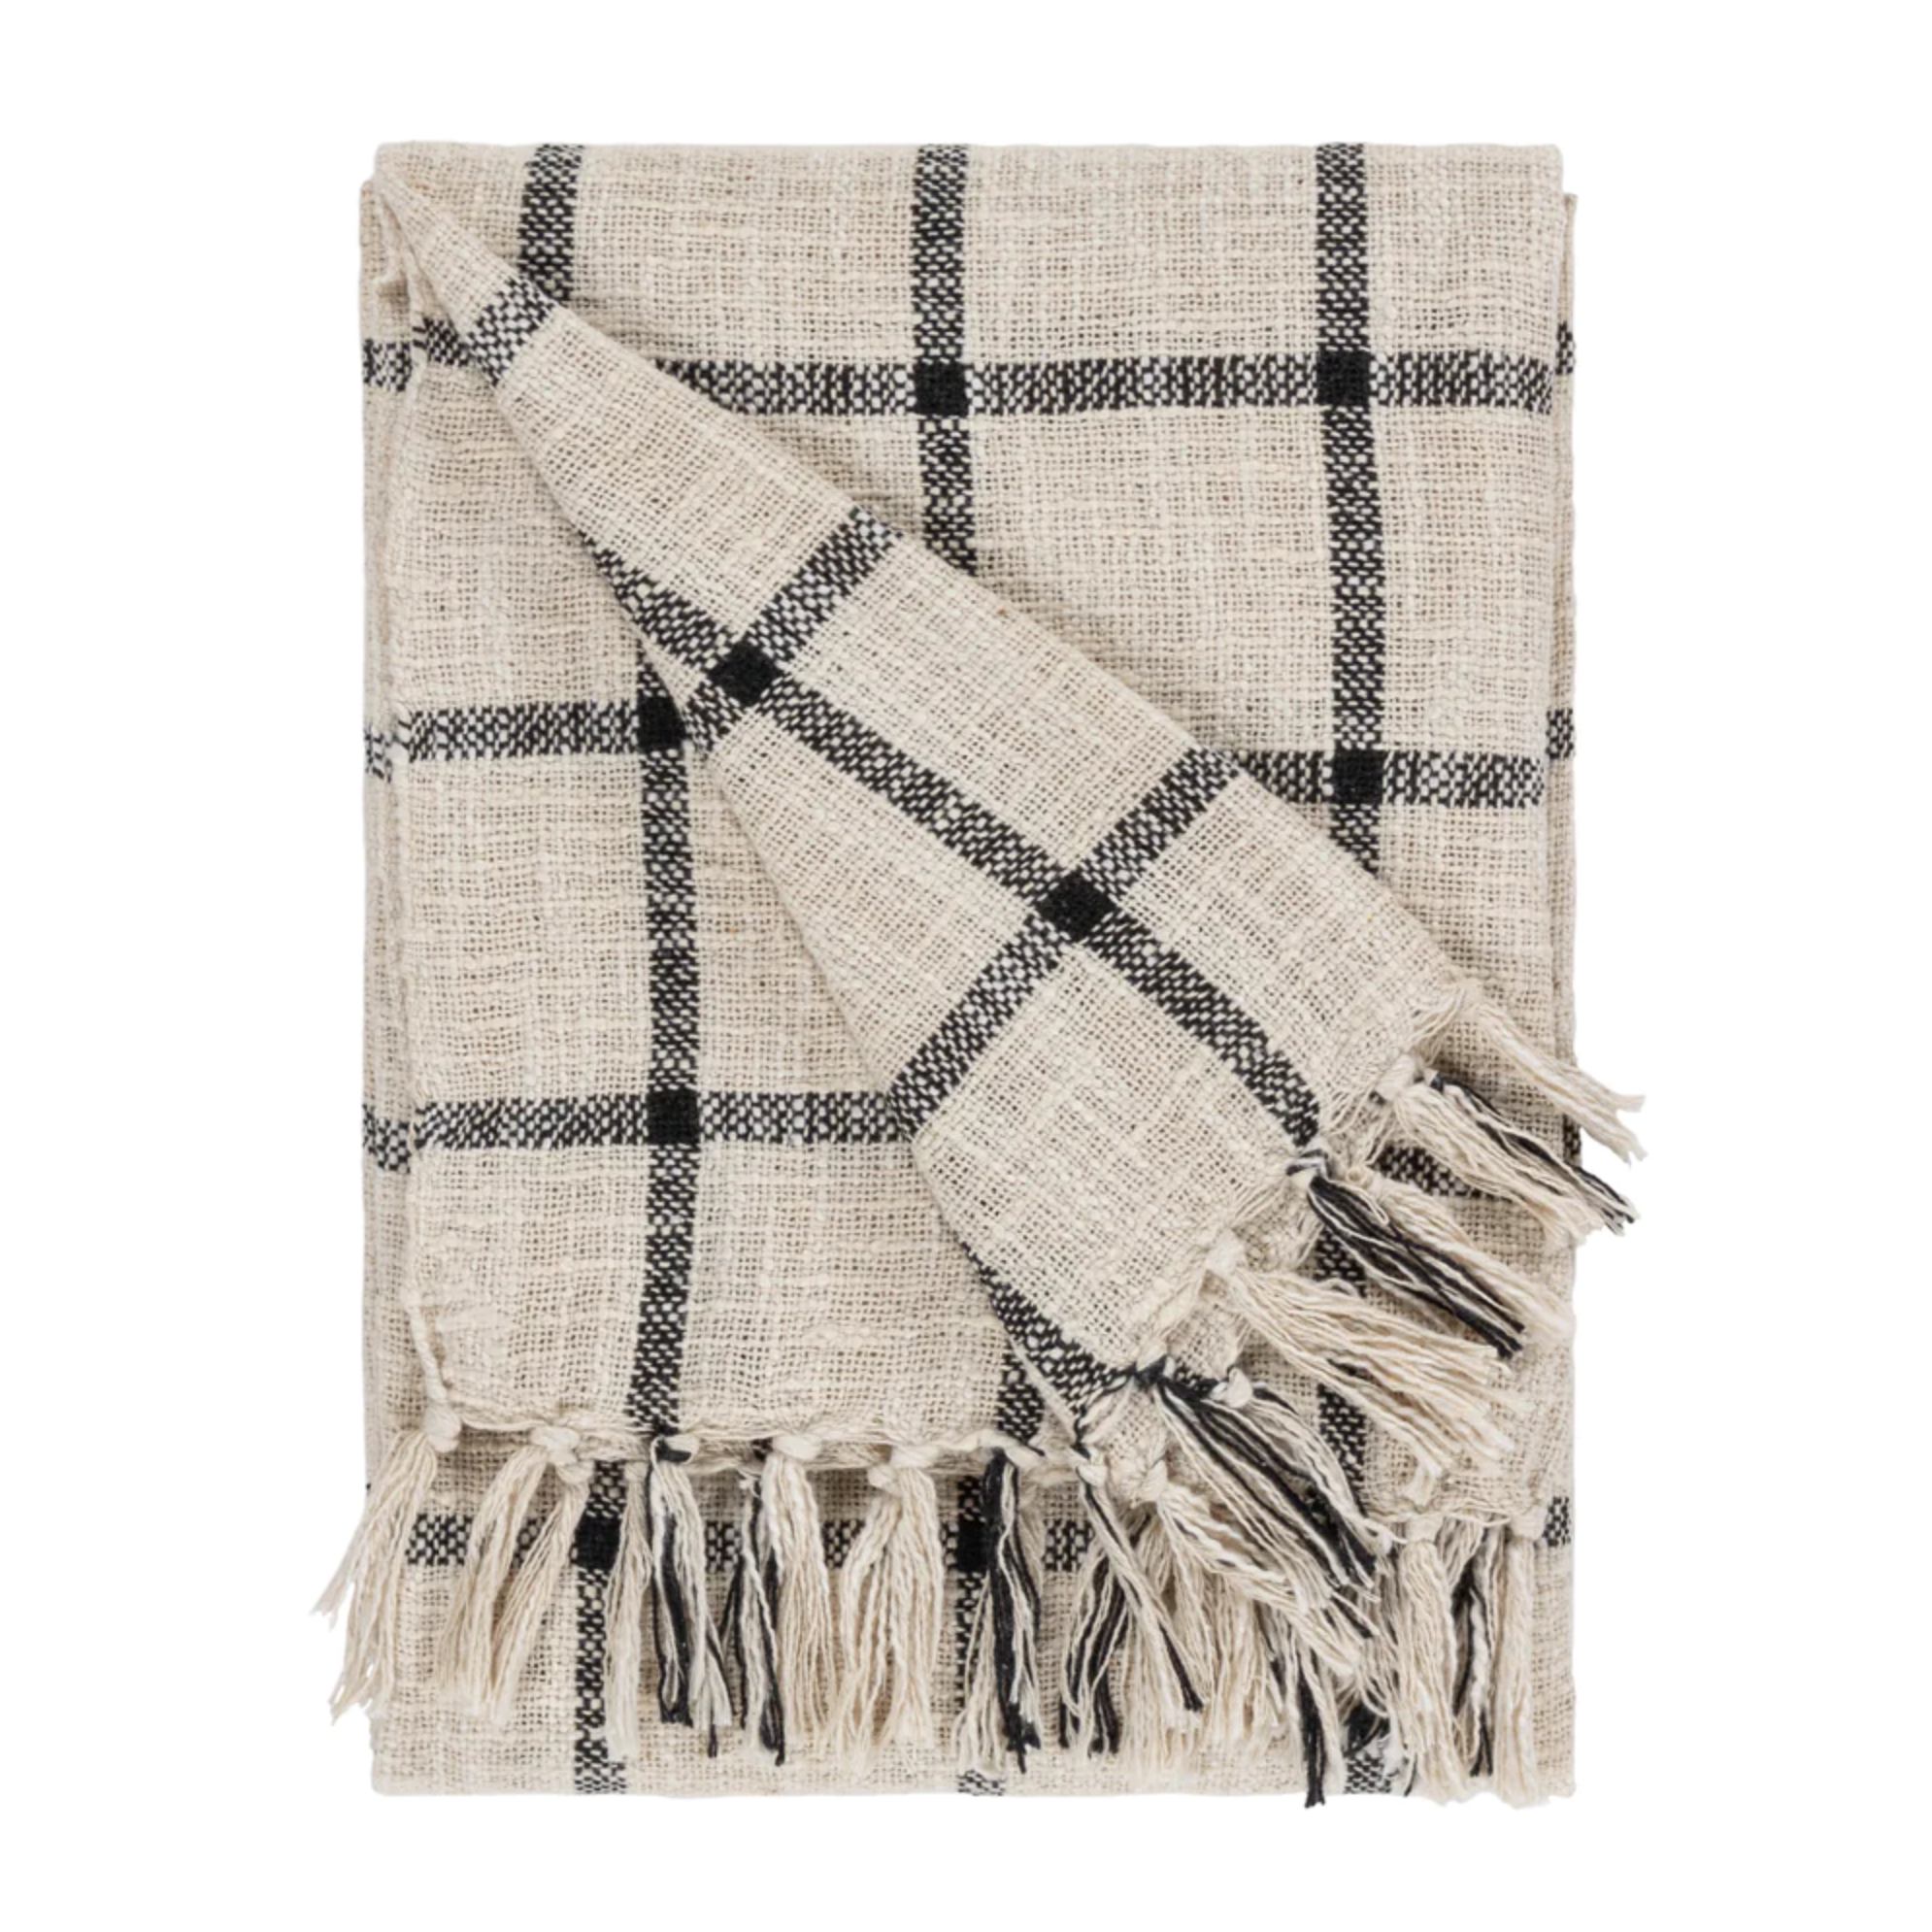 Checked Cotton Throw Blanket with tassels.